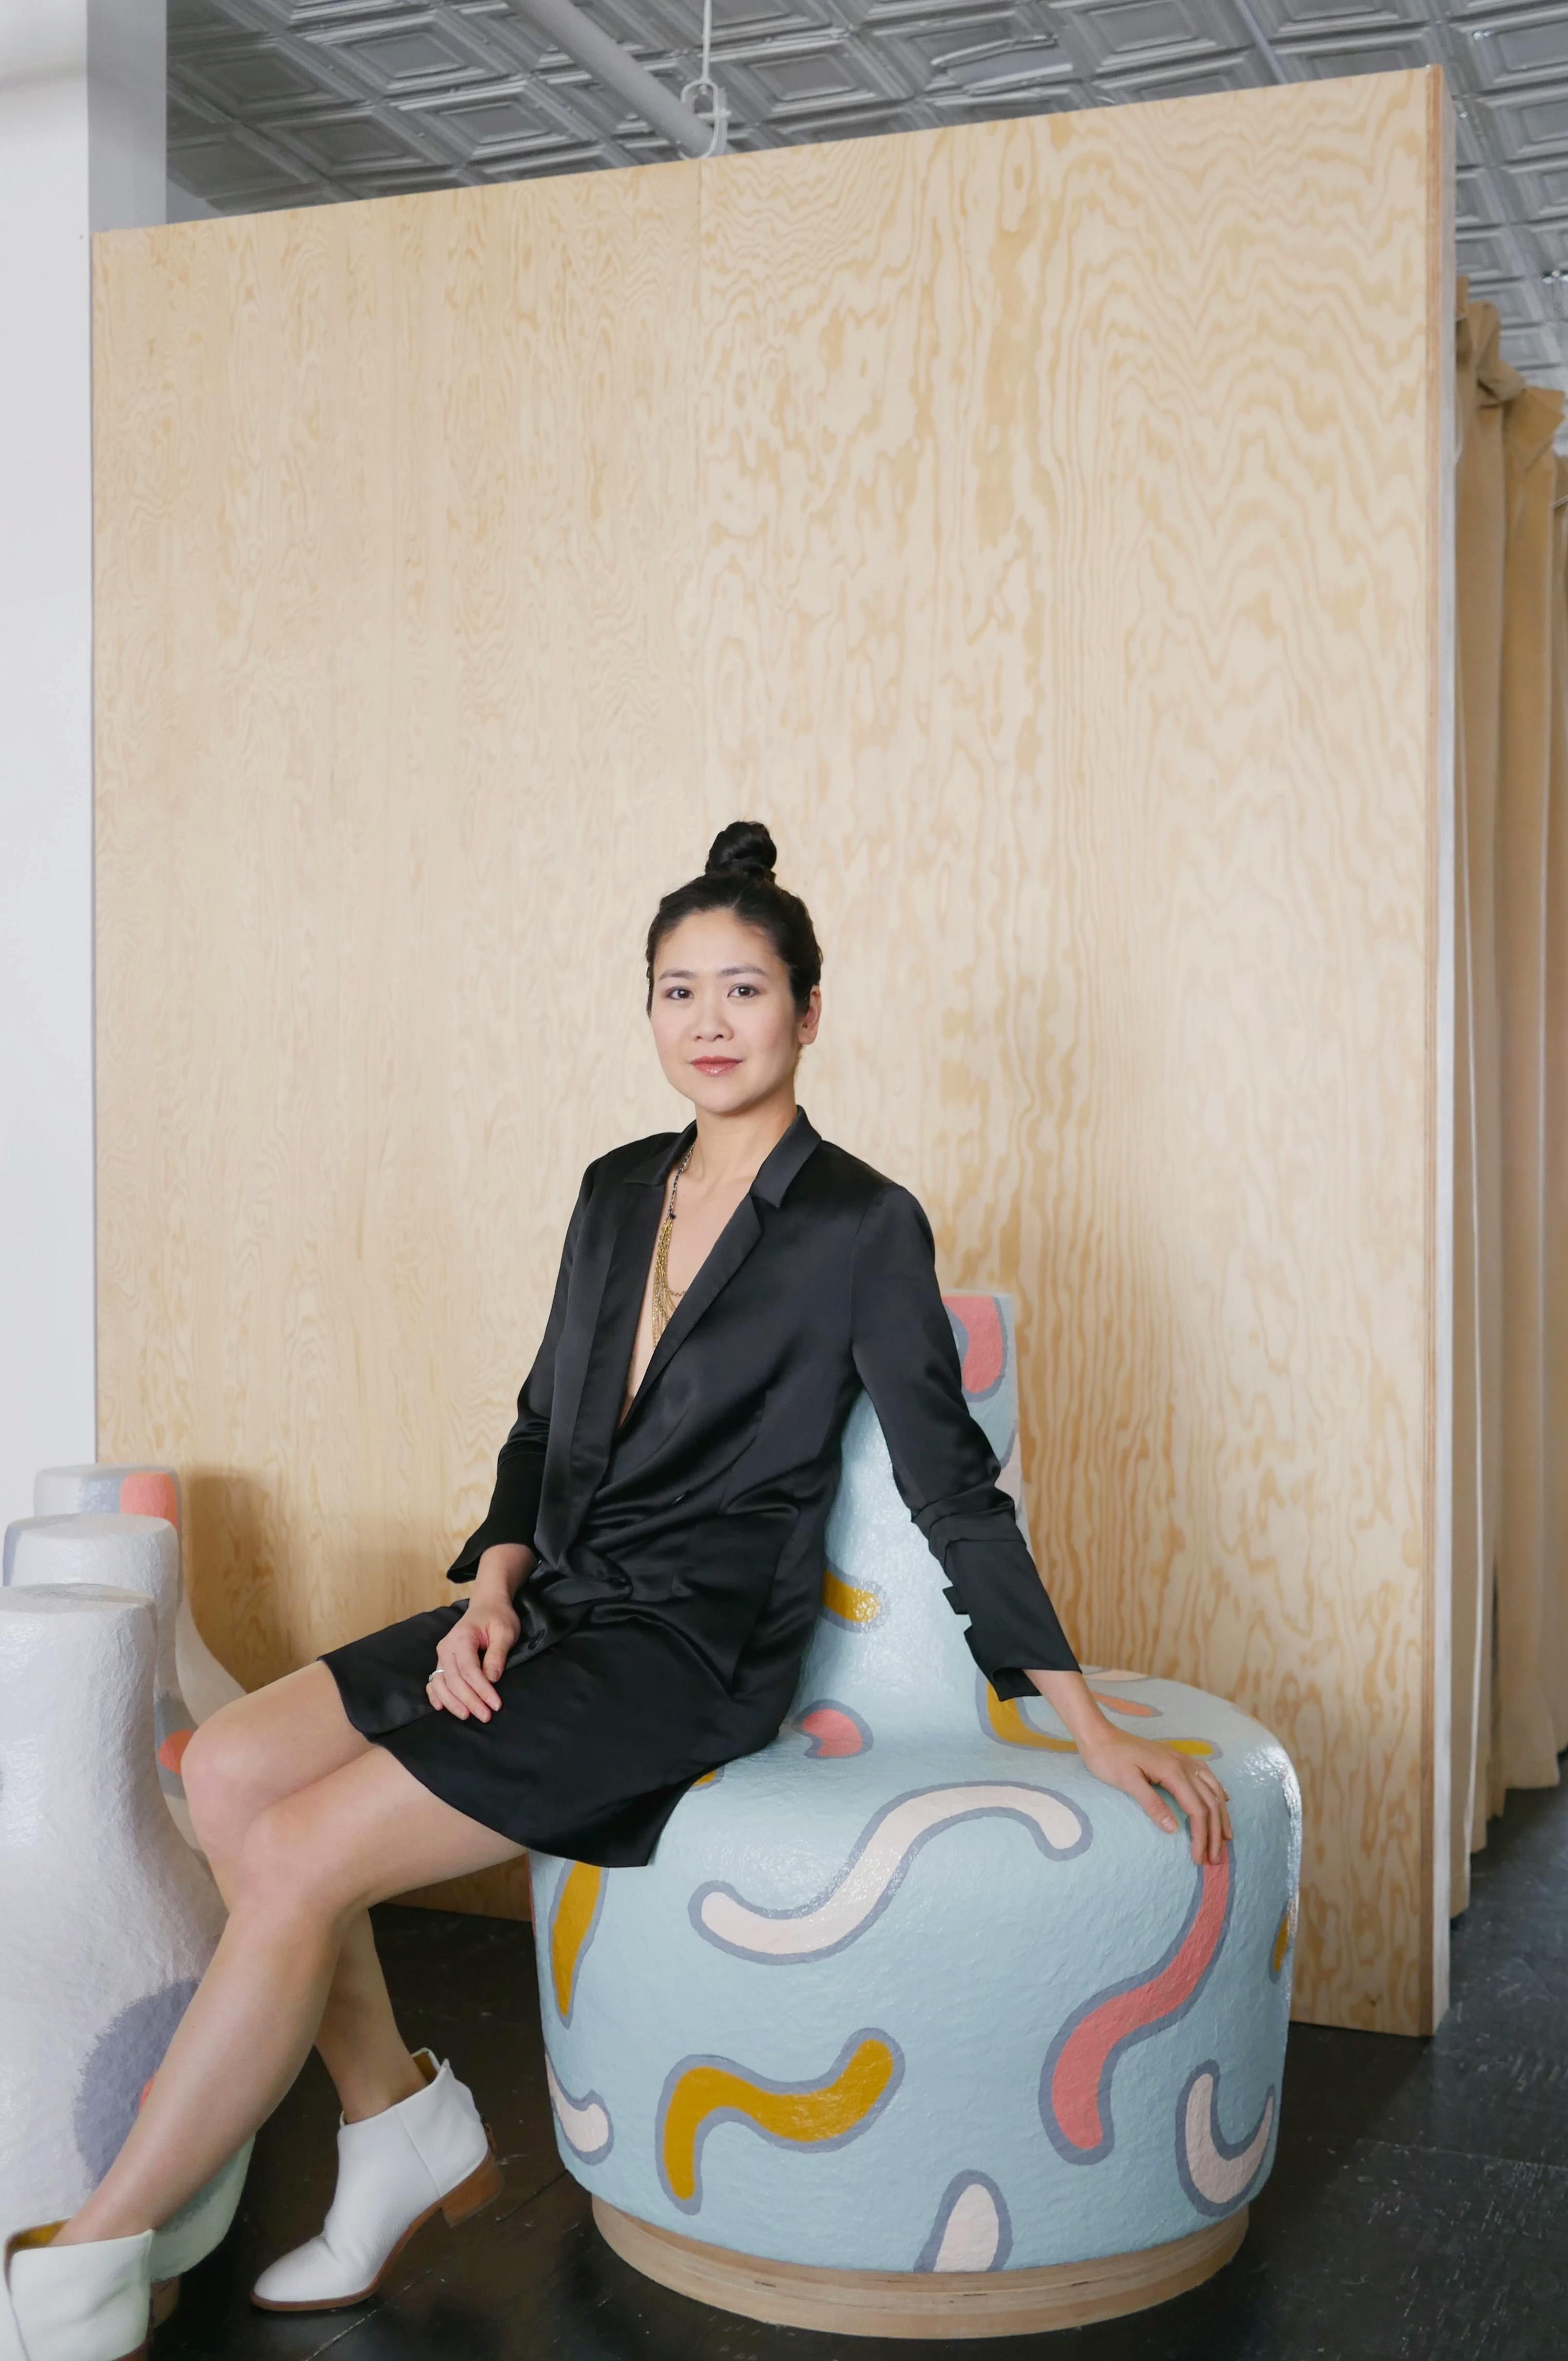 Portrait of founder Tze Chun sitting on a blue chair in front of a wood wall at Uprise Art.